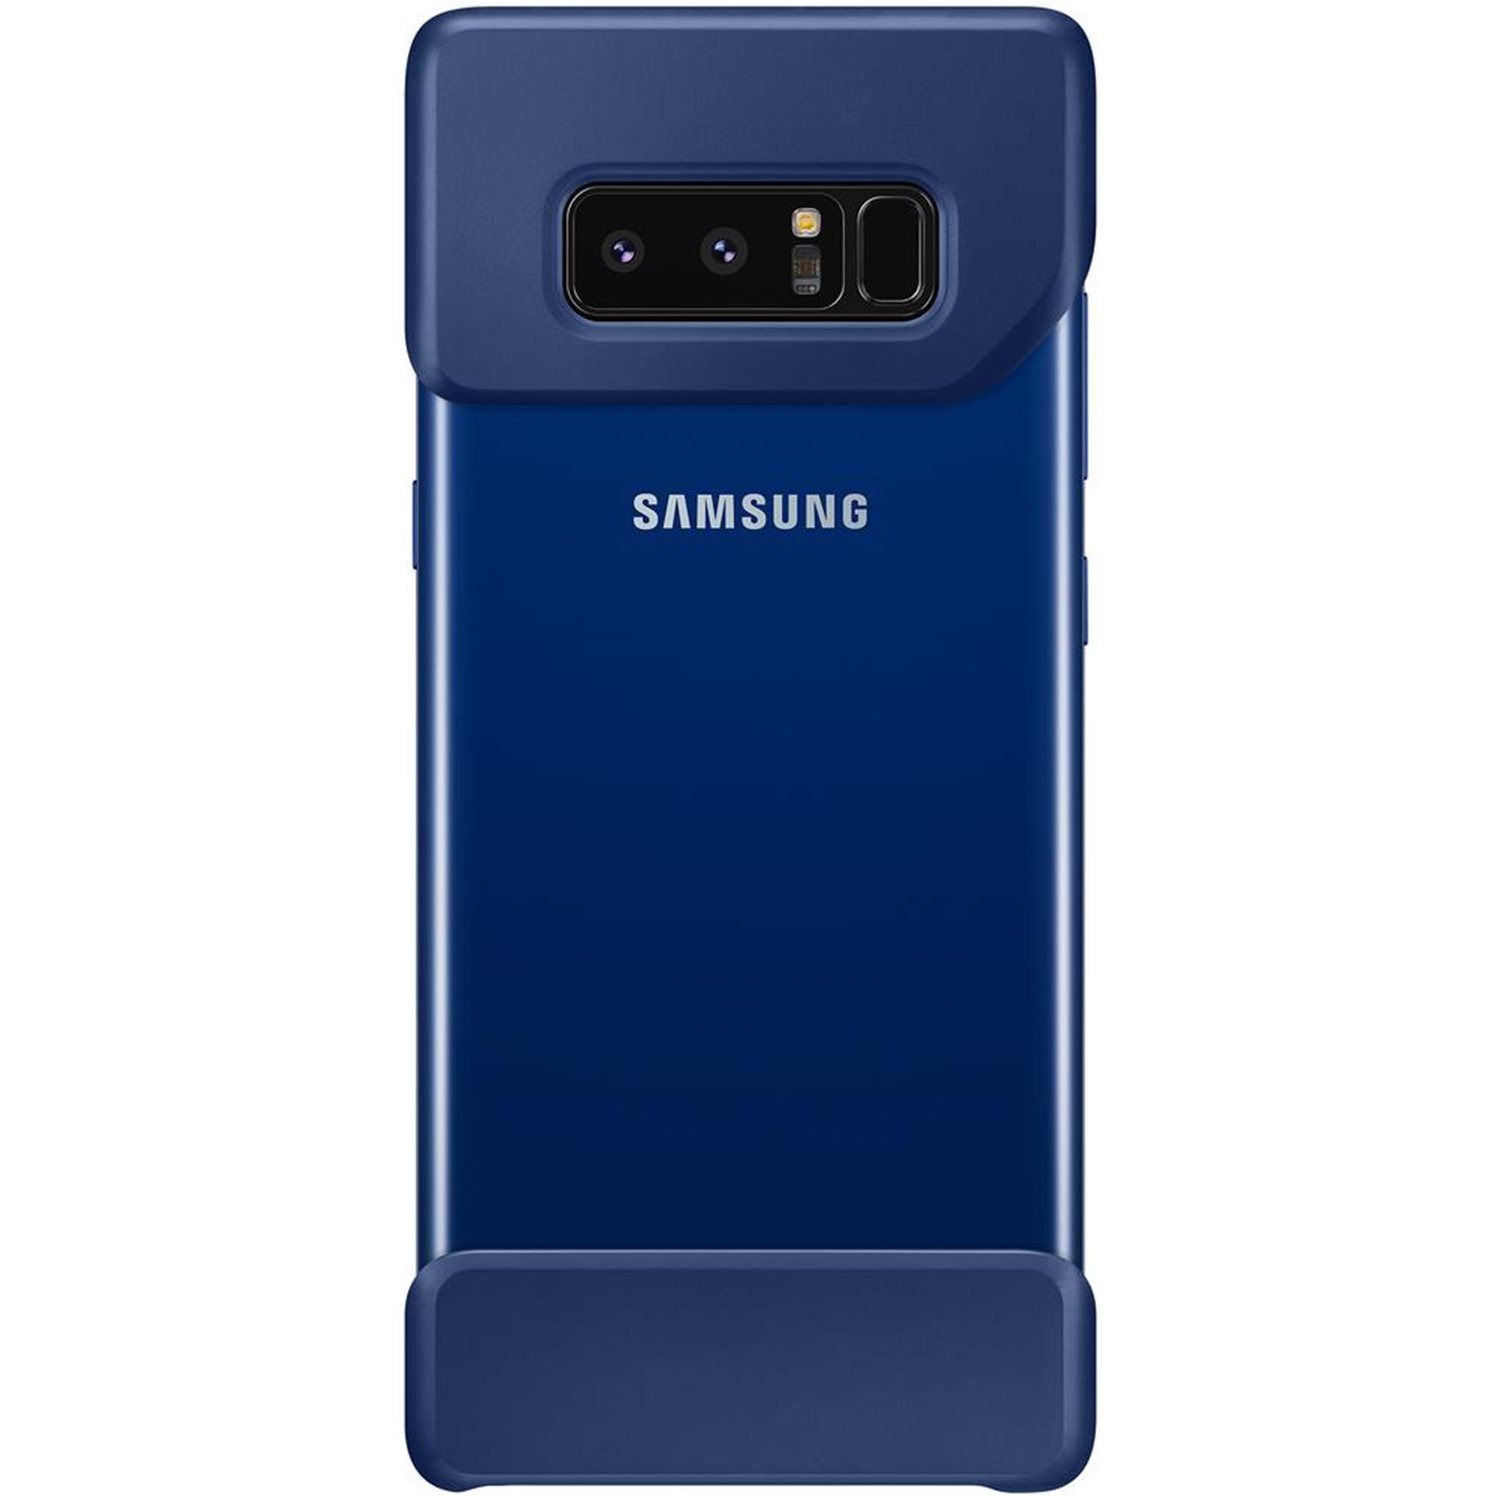 Official Samsung Galaxy Note 8 2-Piece Cover Case - Deep Blue